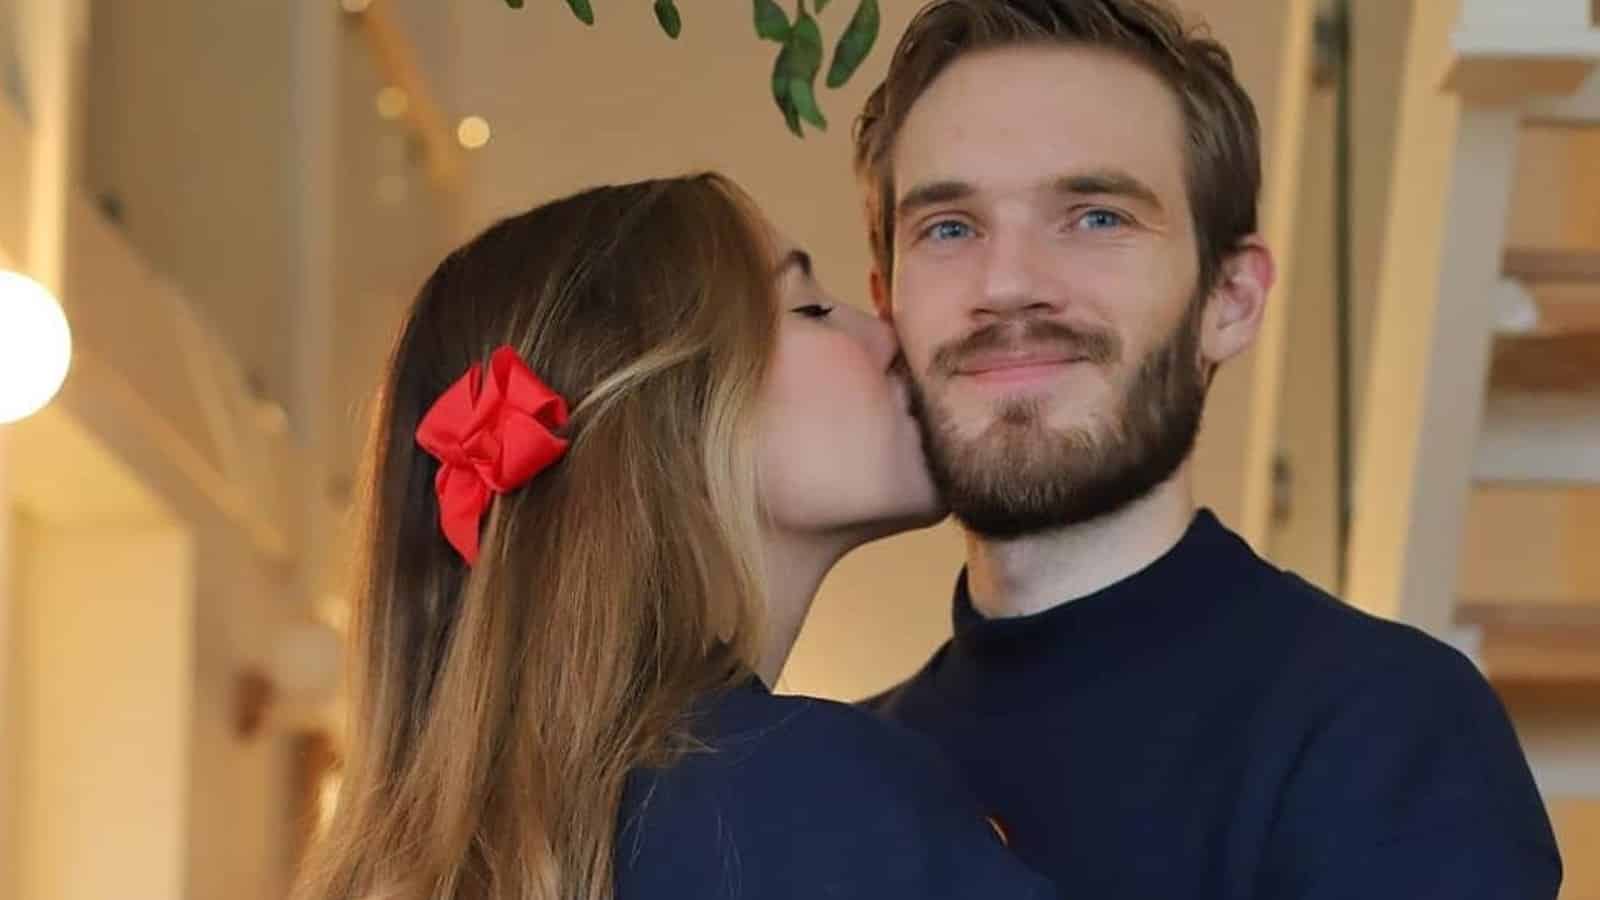 PewDiePie and his wife Marzia kissing his cheek